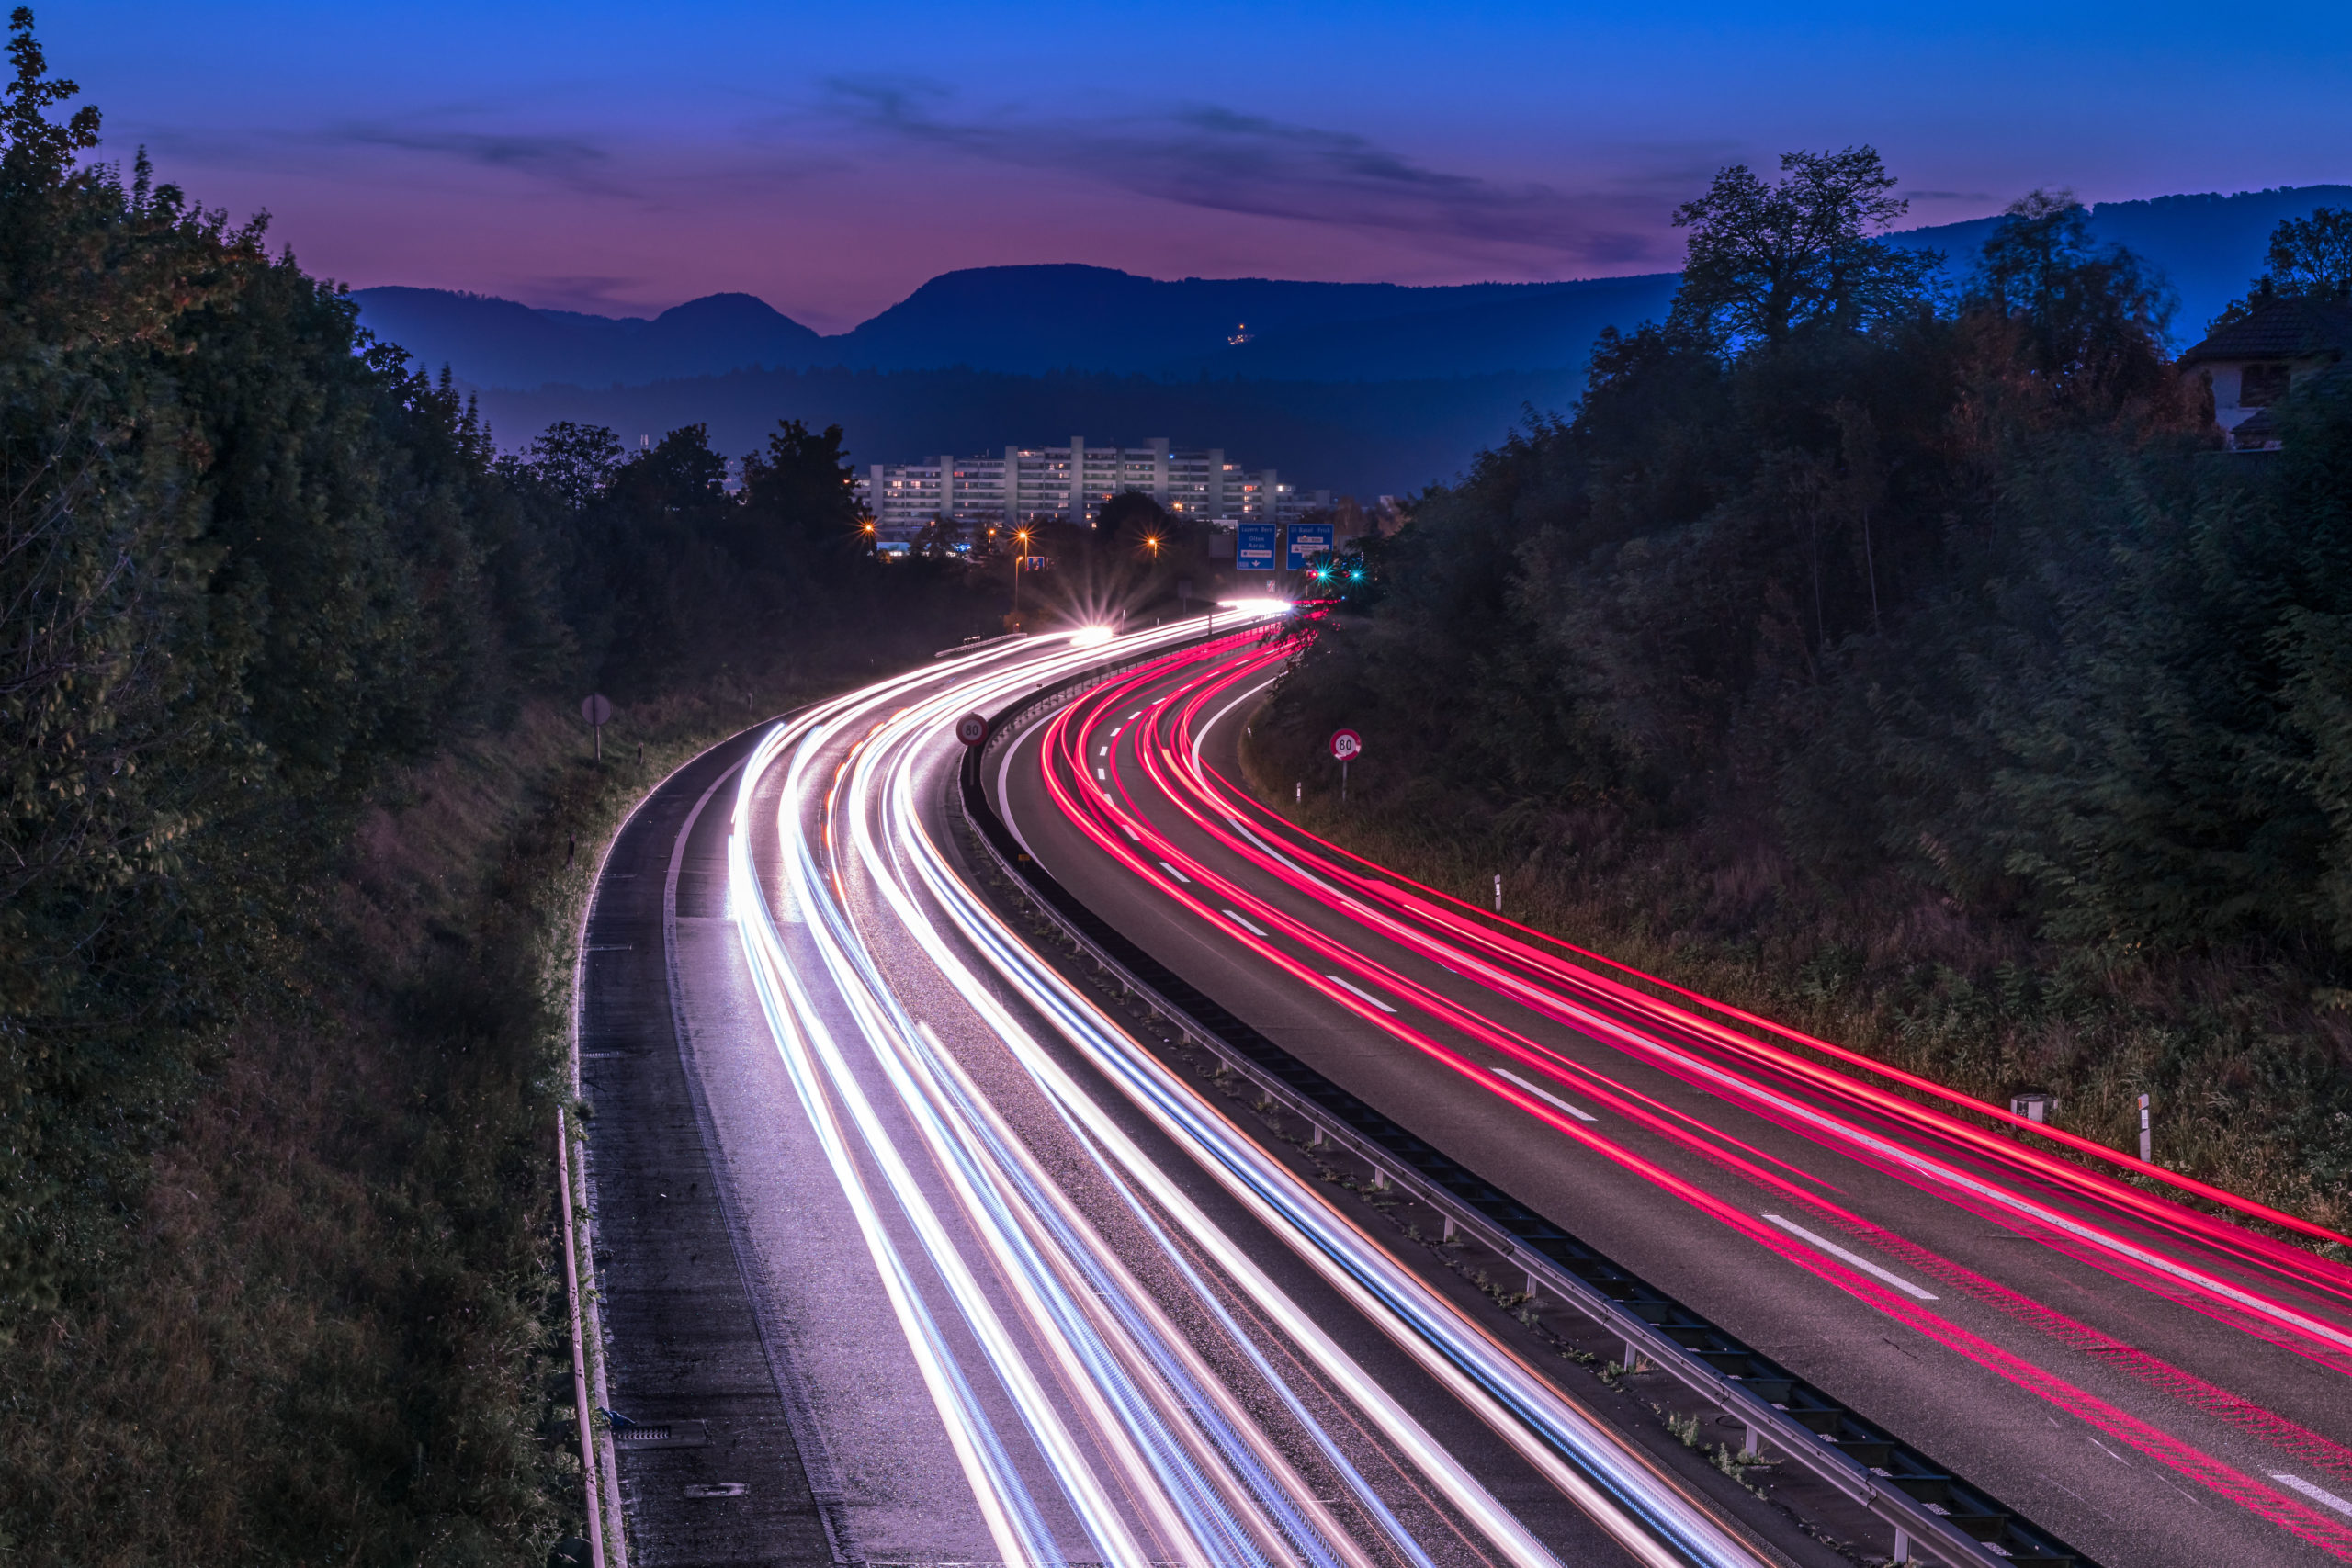 Light trails on the Aaretalstrasse - View at dusk from a bridge over the Aaretalstrasse in Aarau Rohr. 